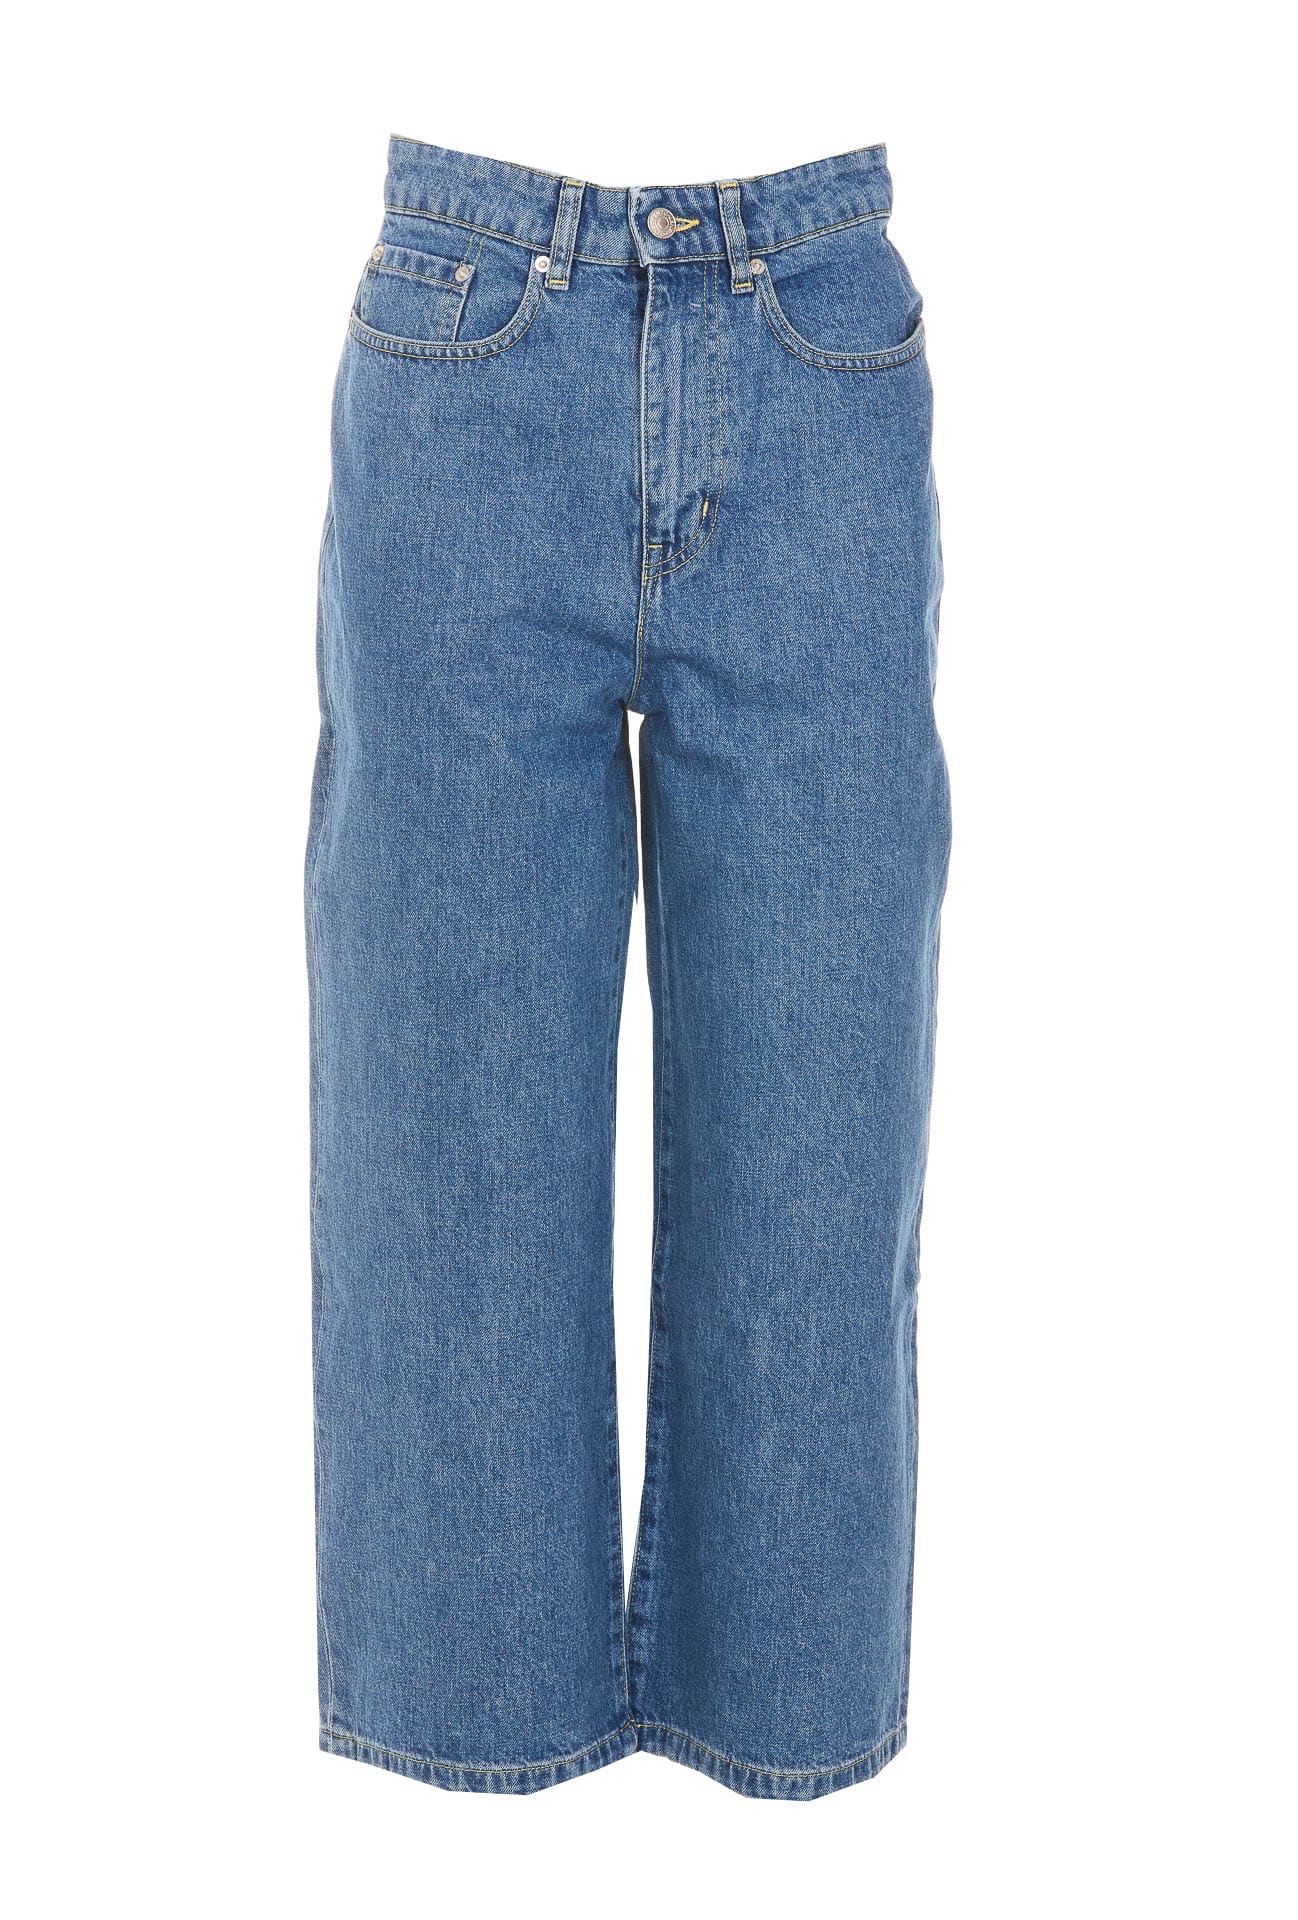 Kenzo Sumire Cropped Jeans